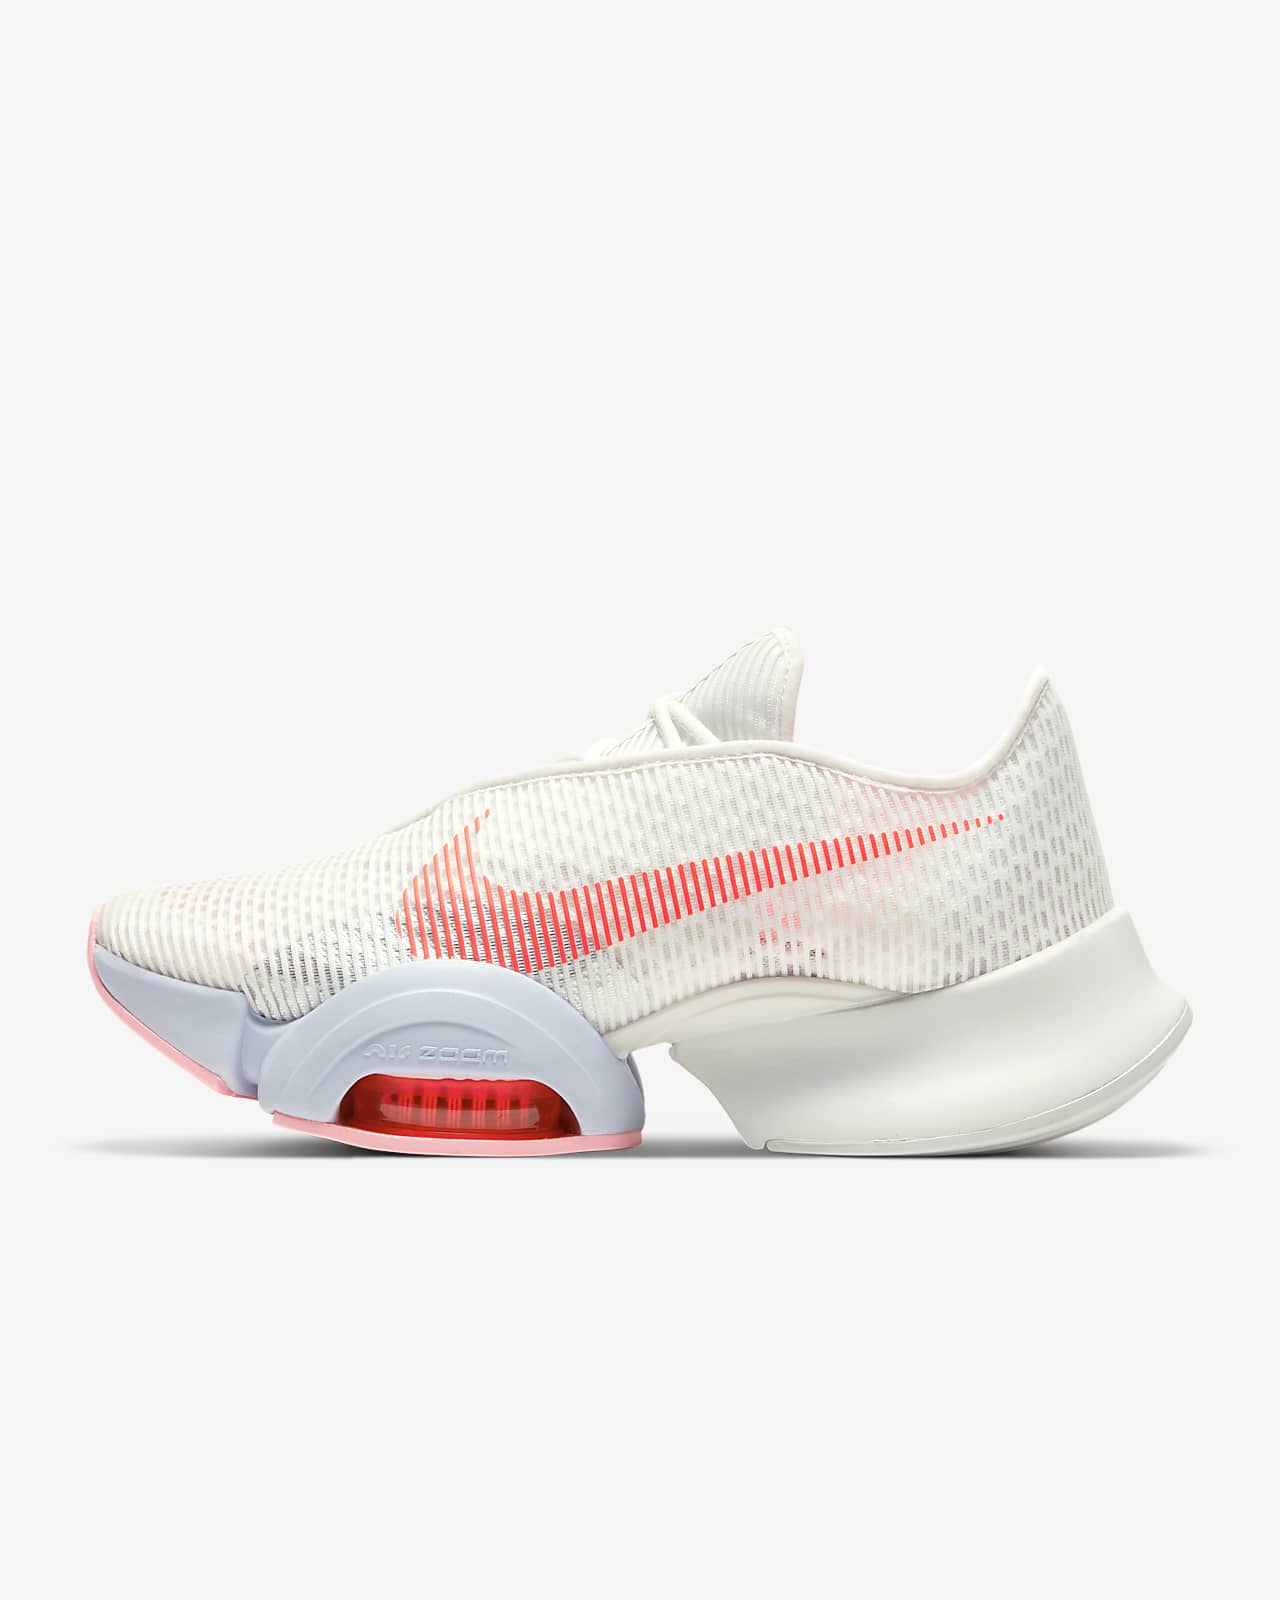 nike hiit shoes